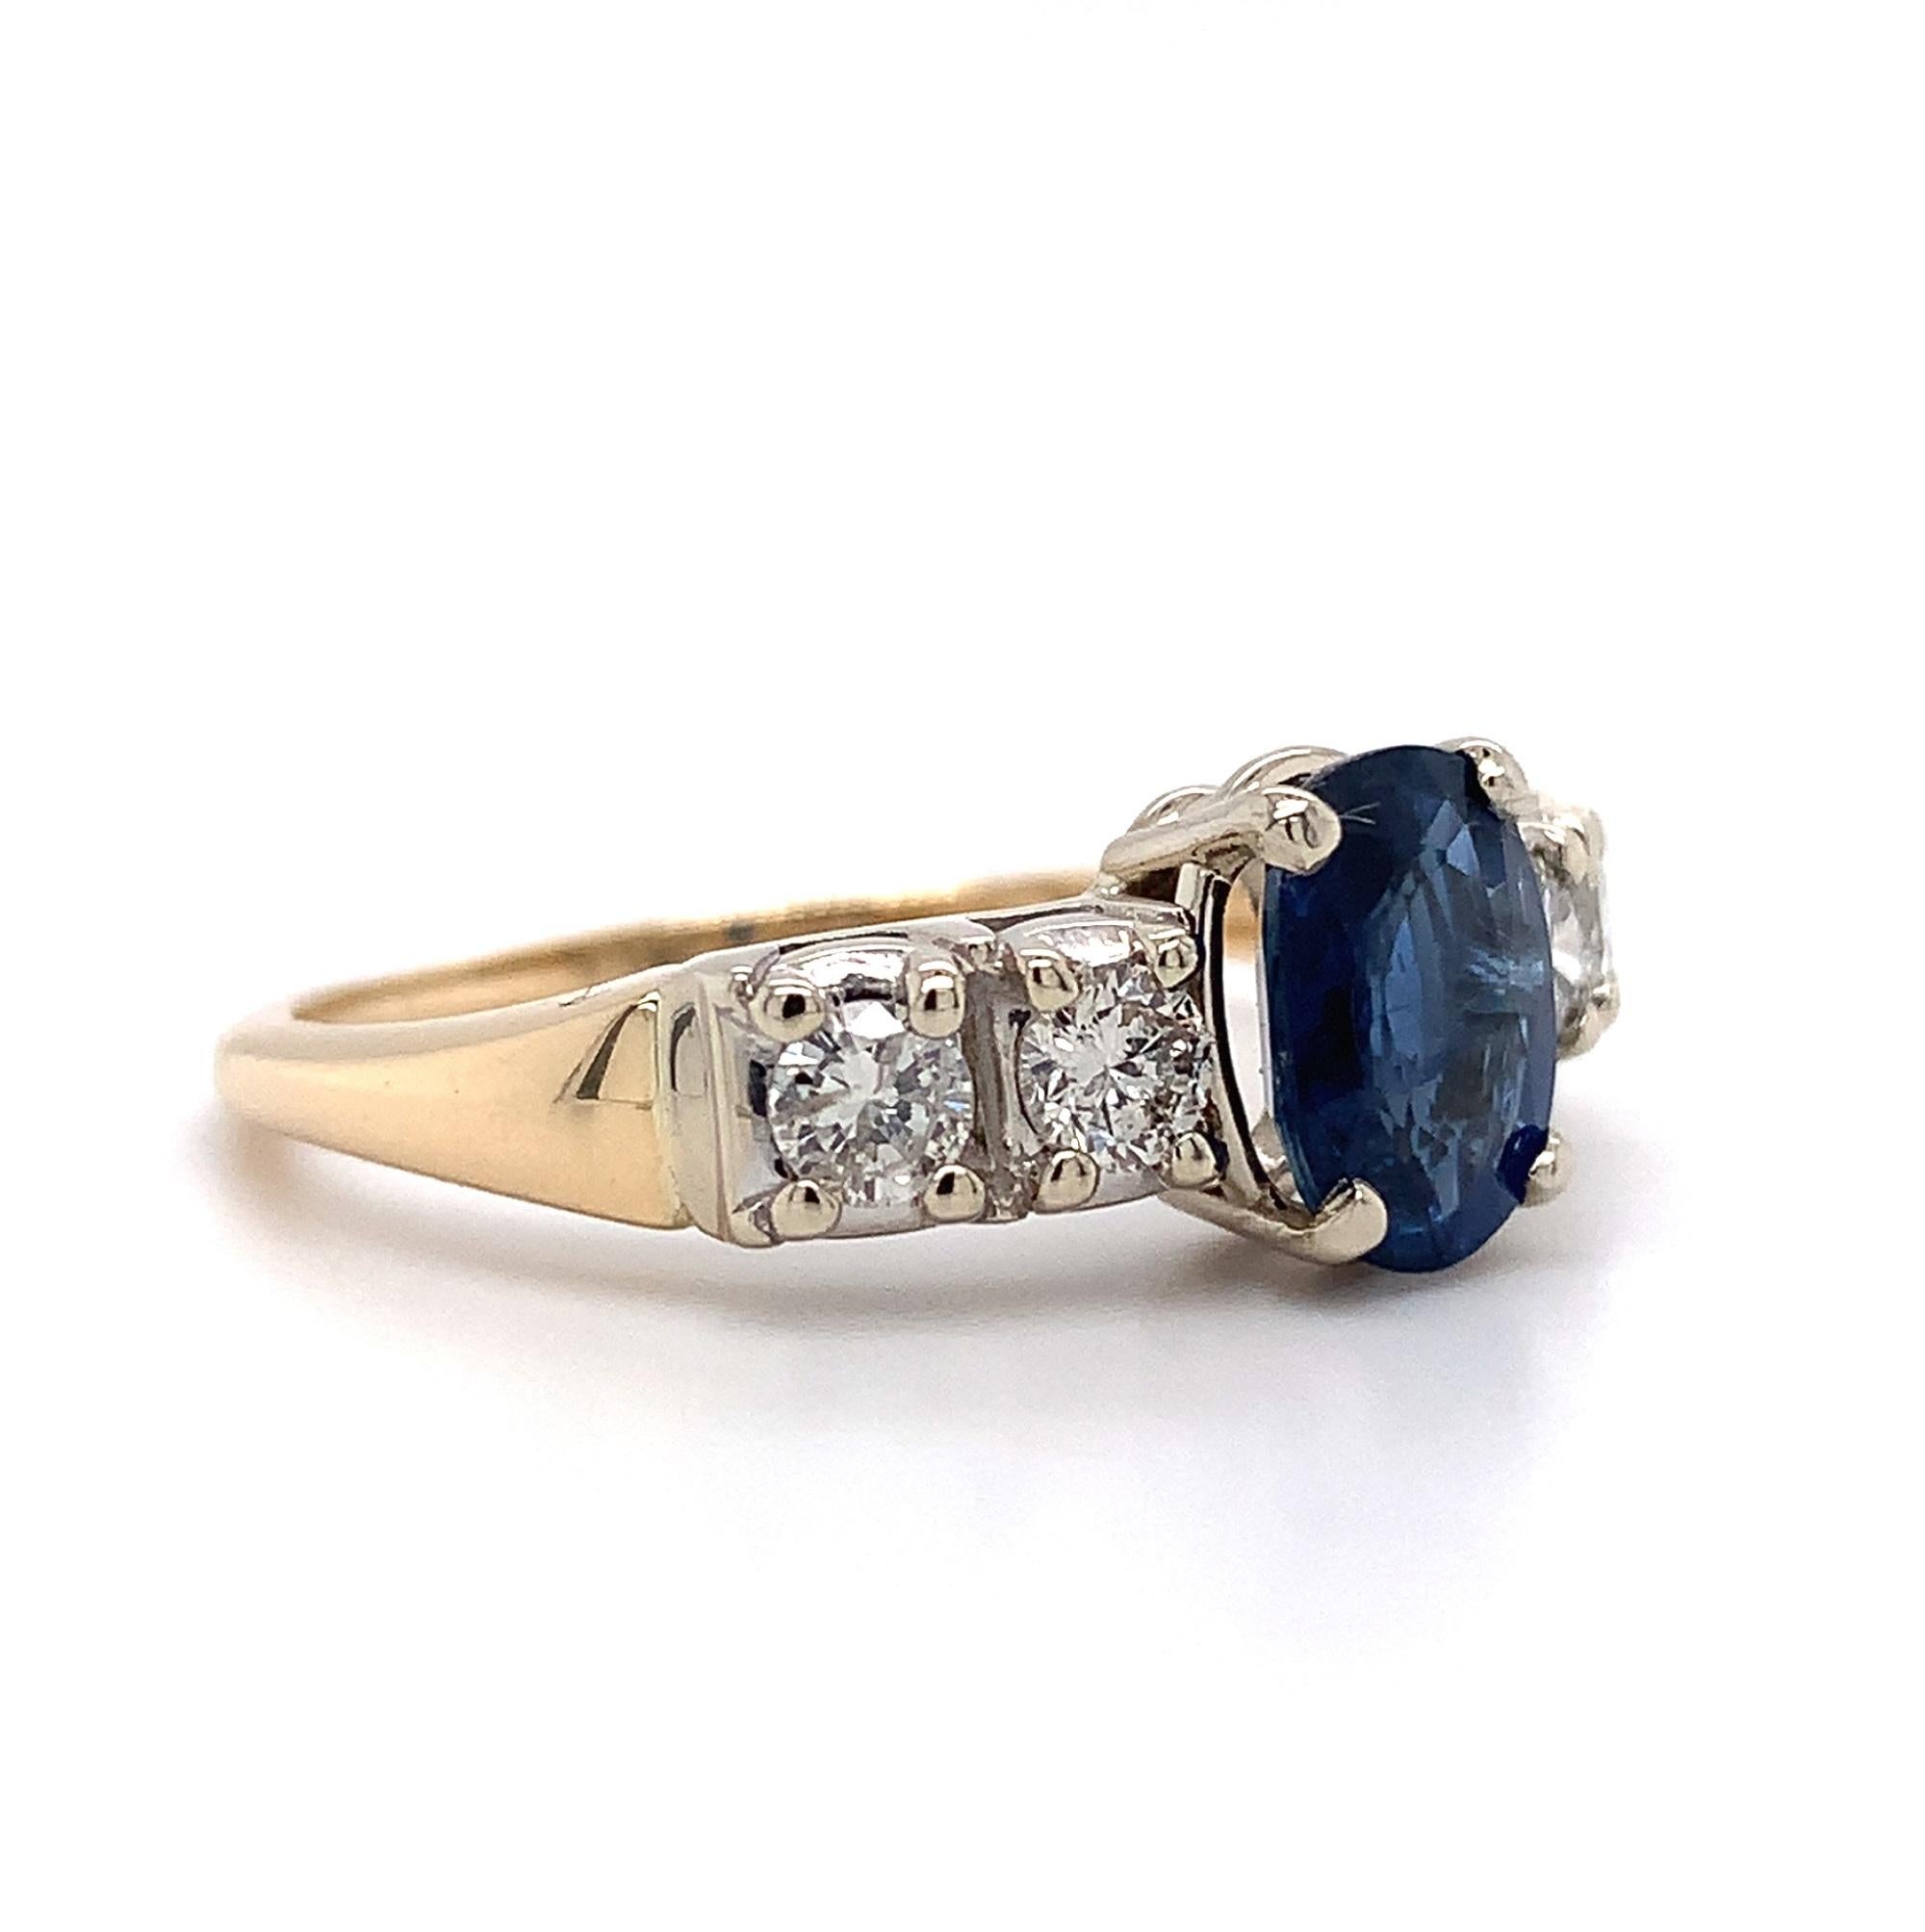 14K yellow gold sapphire and diamond ring featuring an oval blue sapphire weighing 1.52 carats. It measures about 7.8mm x 5.8mm.  The sapphire is large and has fine royal blue color. It does have a surface reaching natural inclusion. The sapphire is